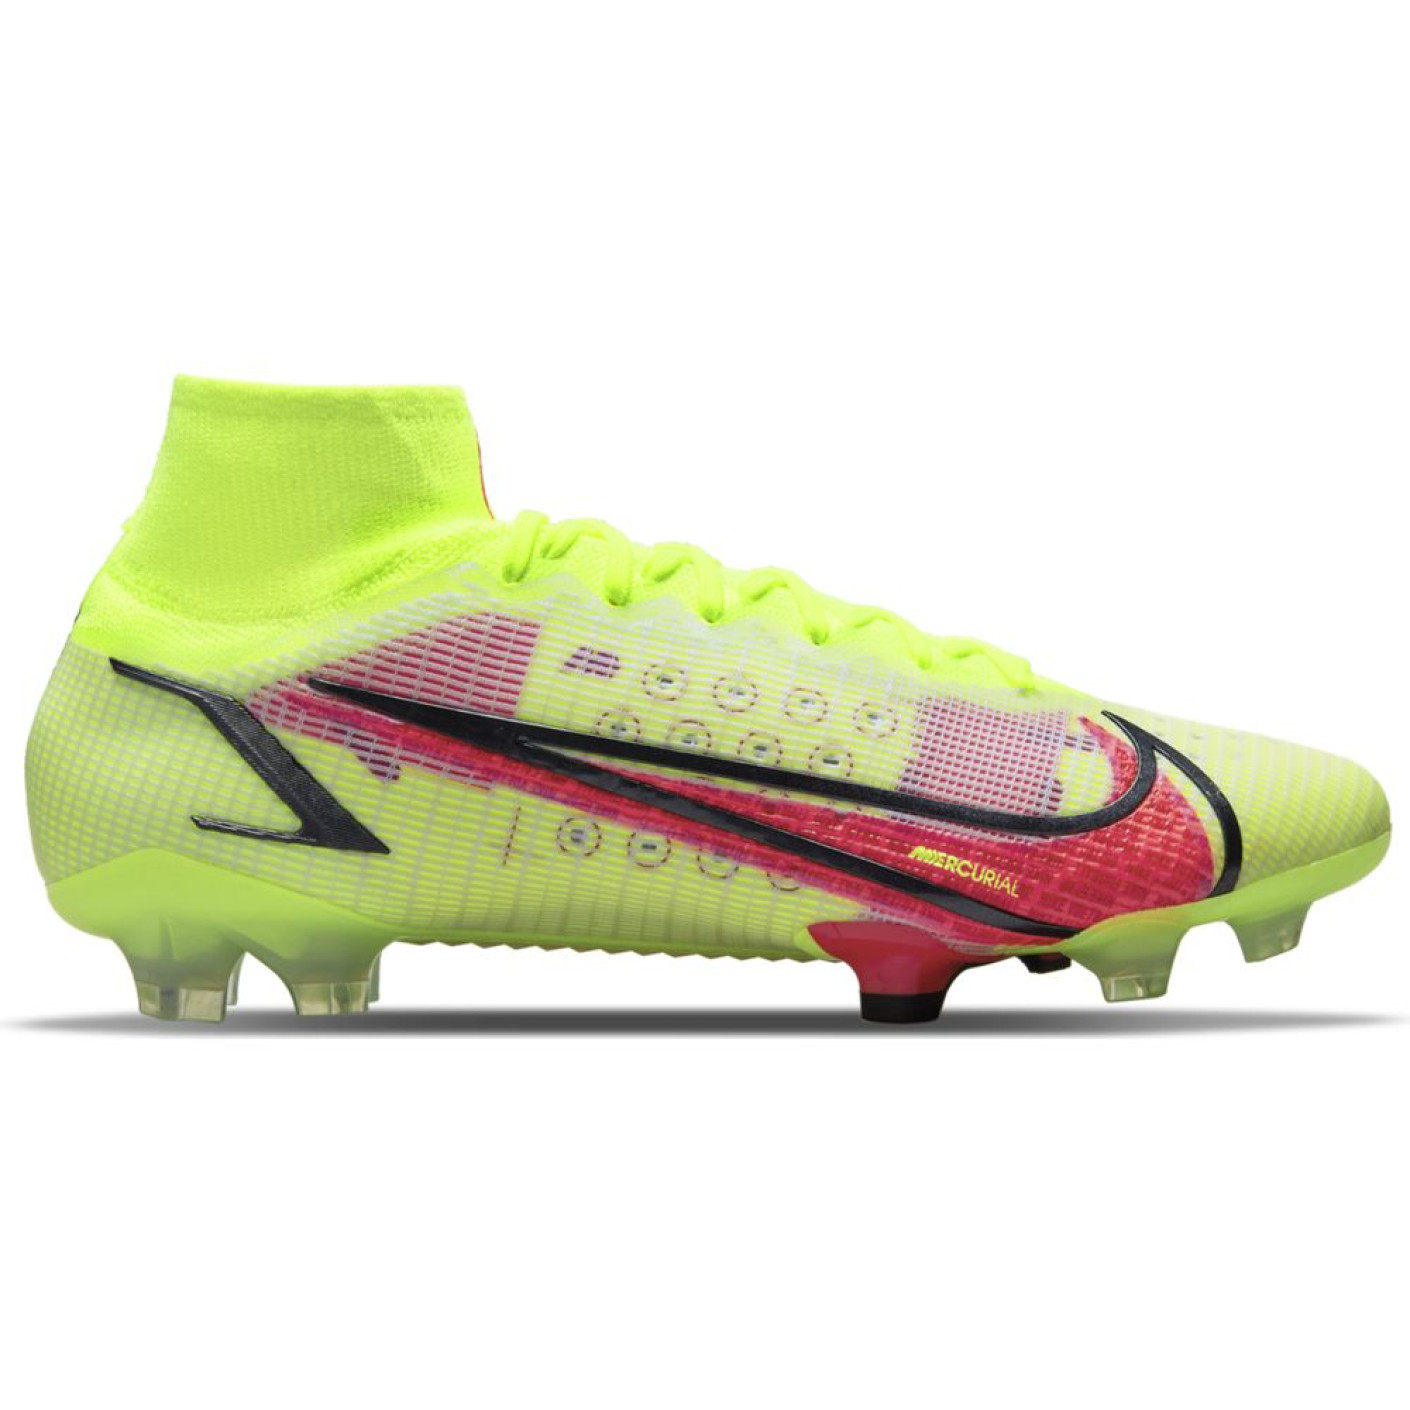 Nike Mercurial Superfly 8 Elite Football Boots (FG) Yellow Red Black